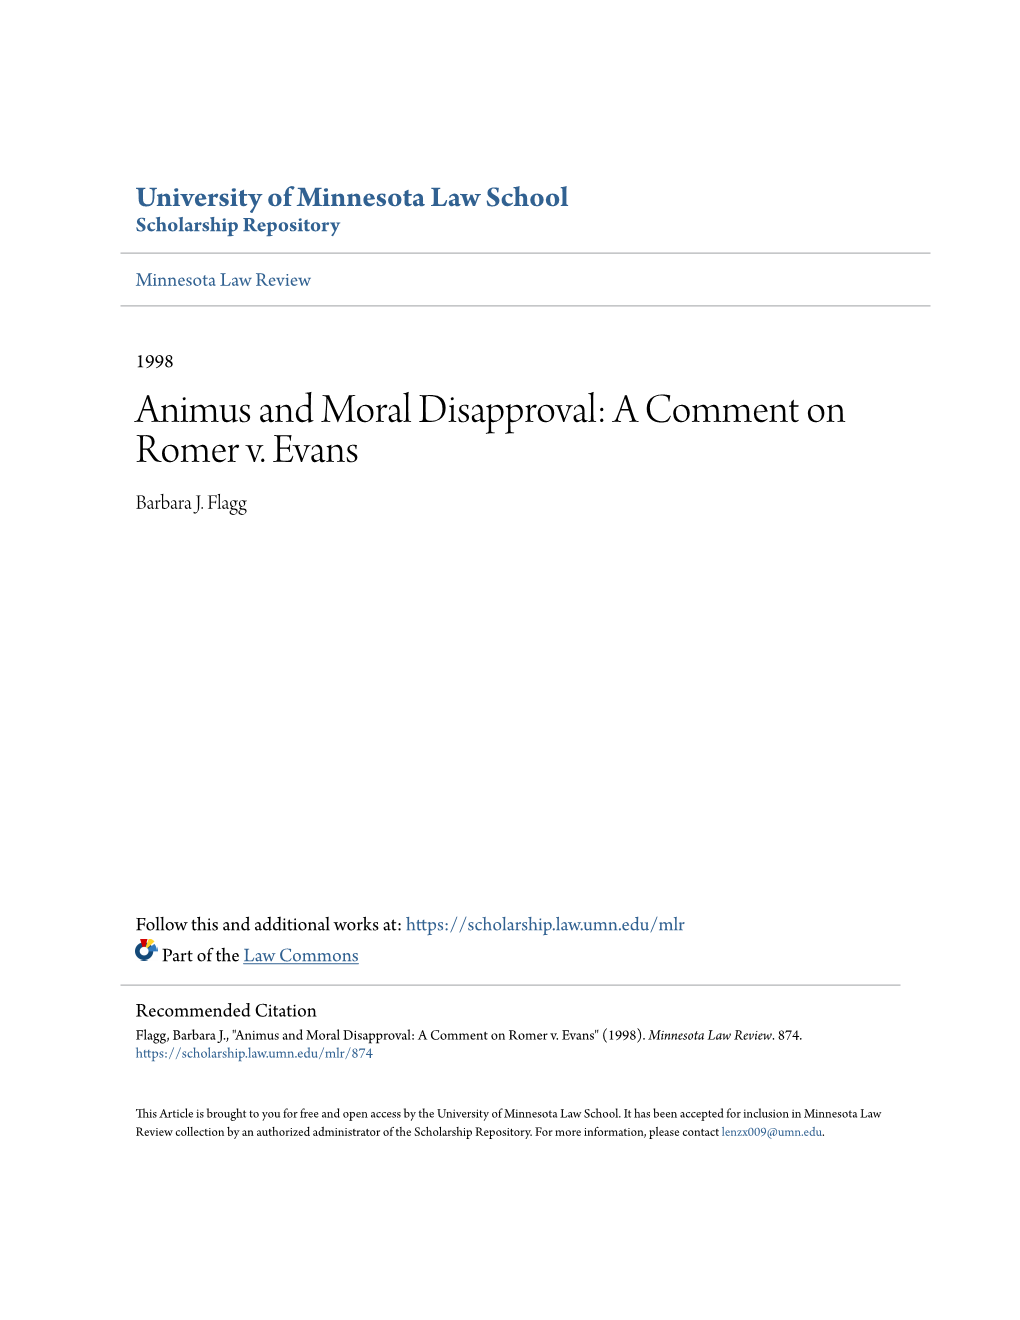 Animus and Moral Disapproval: a Comment on Romer V. Evans Barbara J